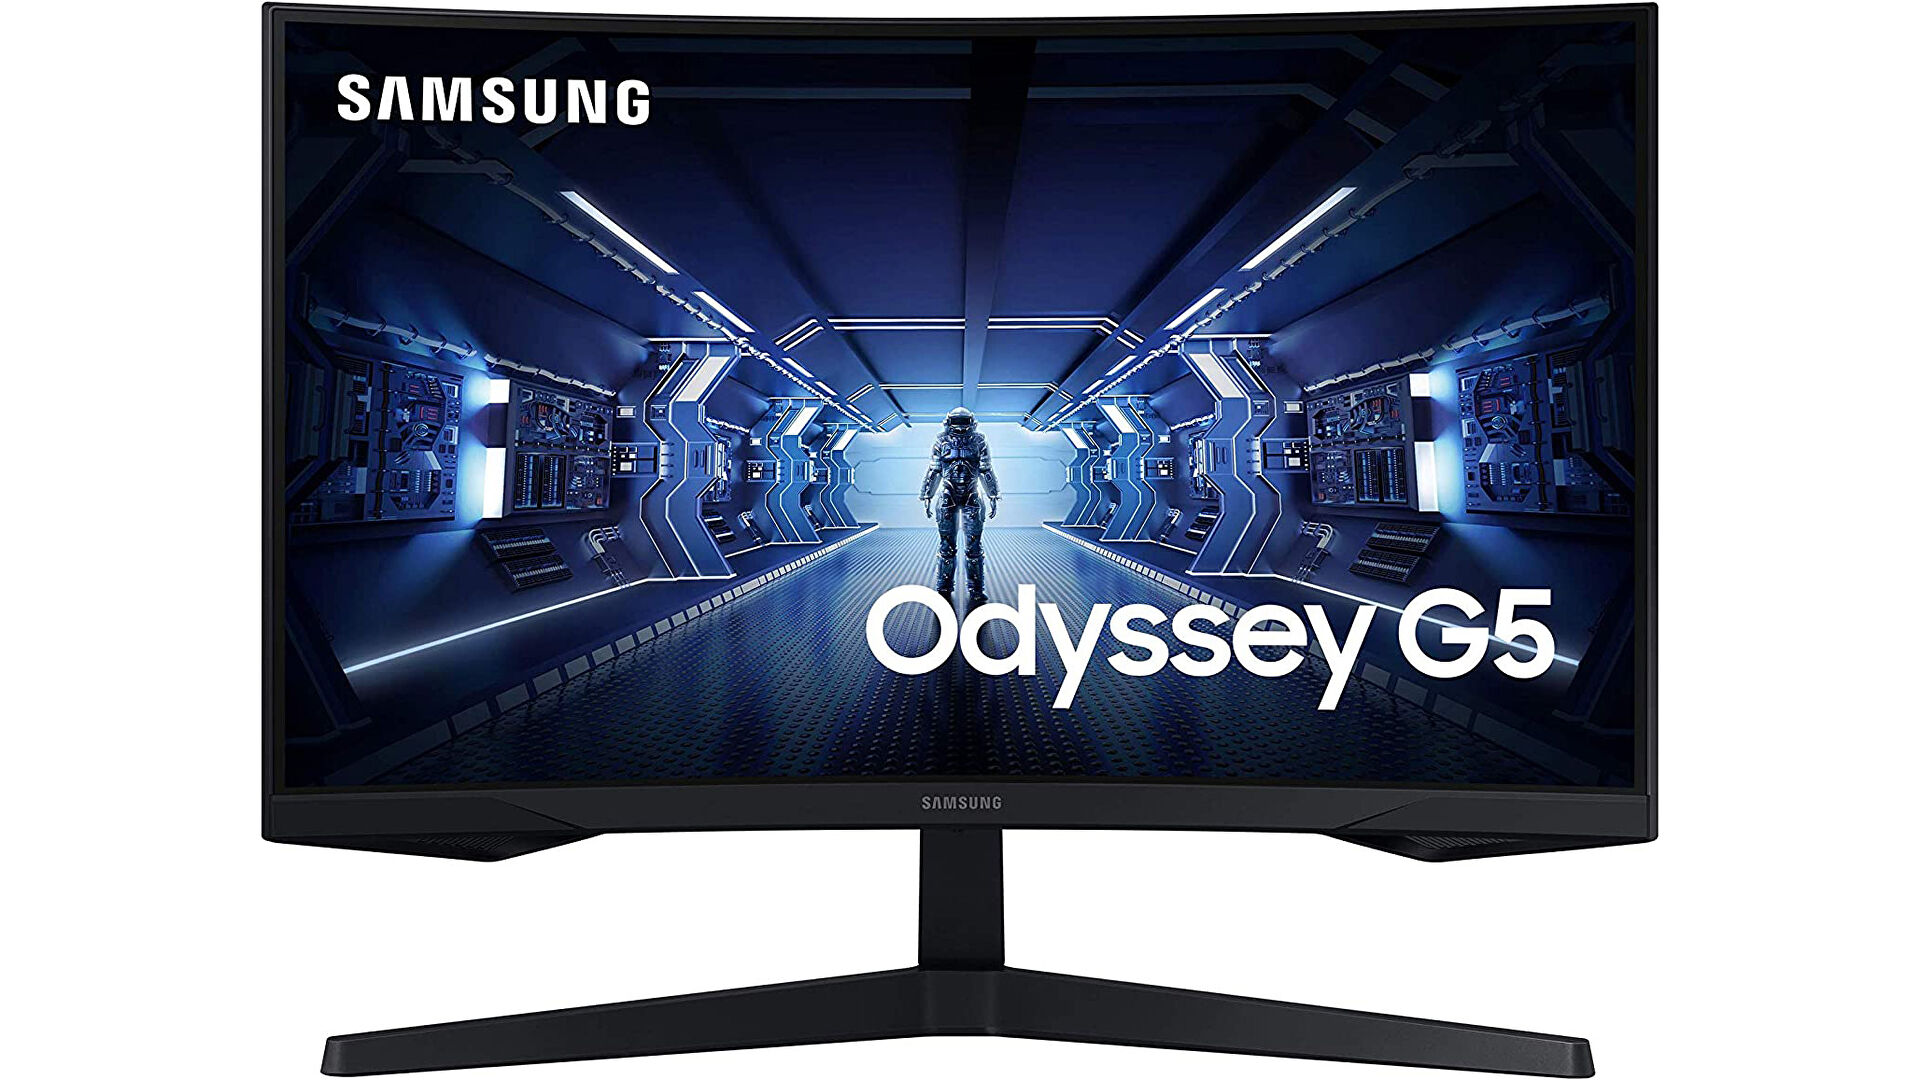 Samsung’s Odyssey G5 1440p 144Hz monitor is just £180 at Currys with this code